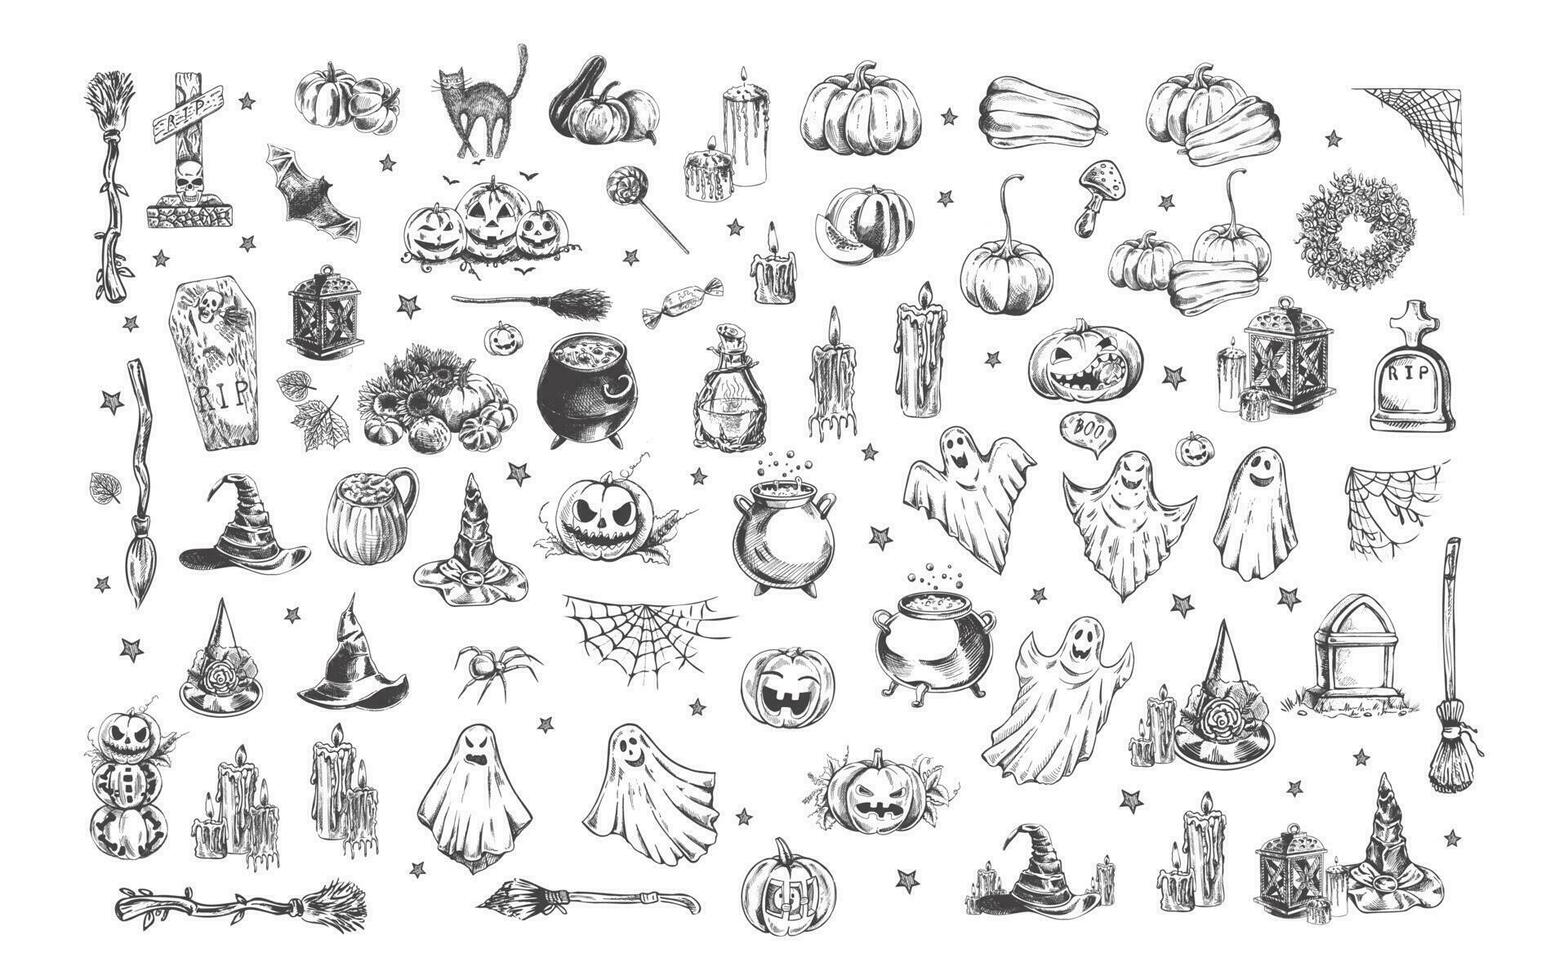 Big set of halloween elements in sketch style. Design of witch, ghost, creepy and spooky elements for halloween decorations, sketch, icon. Hand drawn vector isolated on white  background.